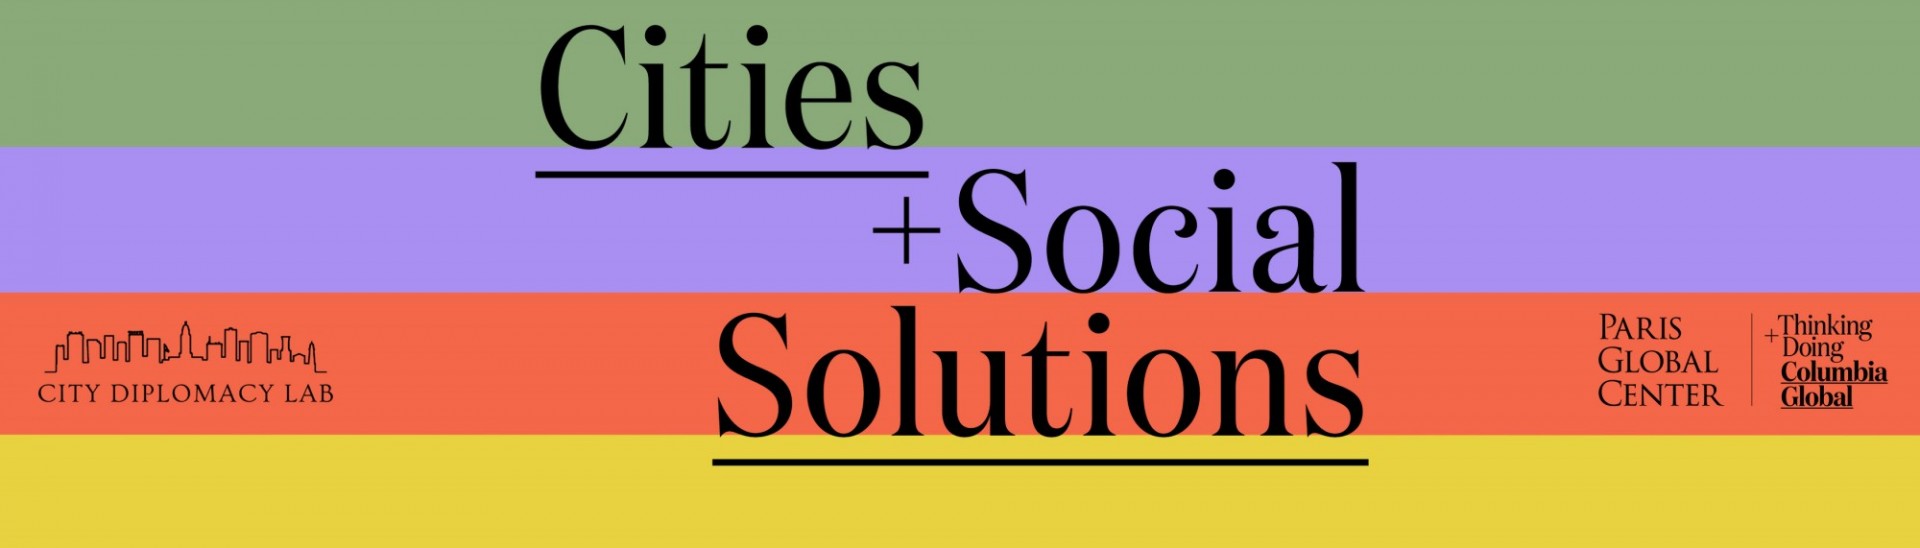 Cities and Social Solutions